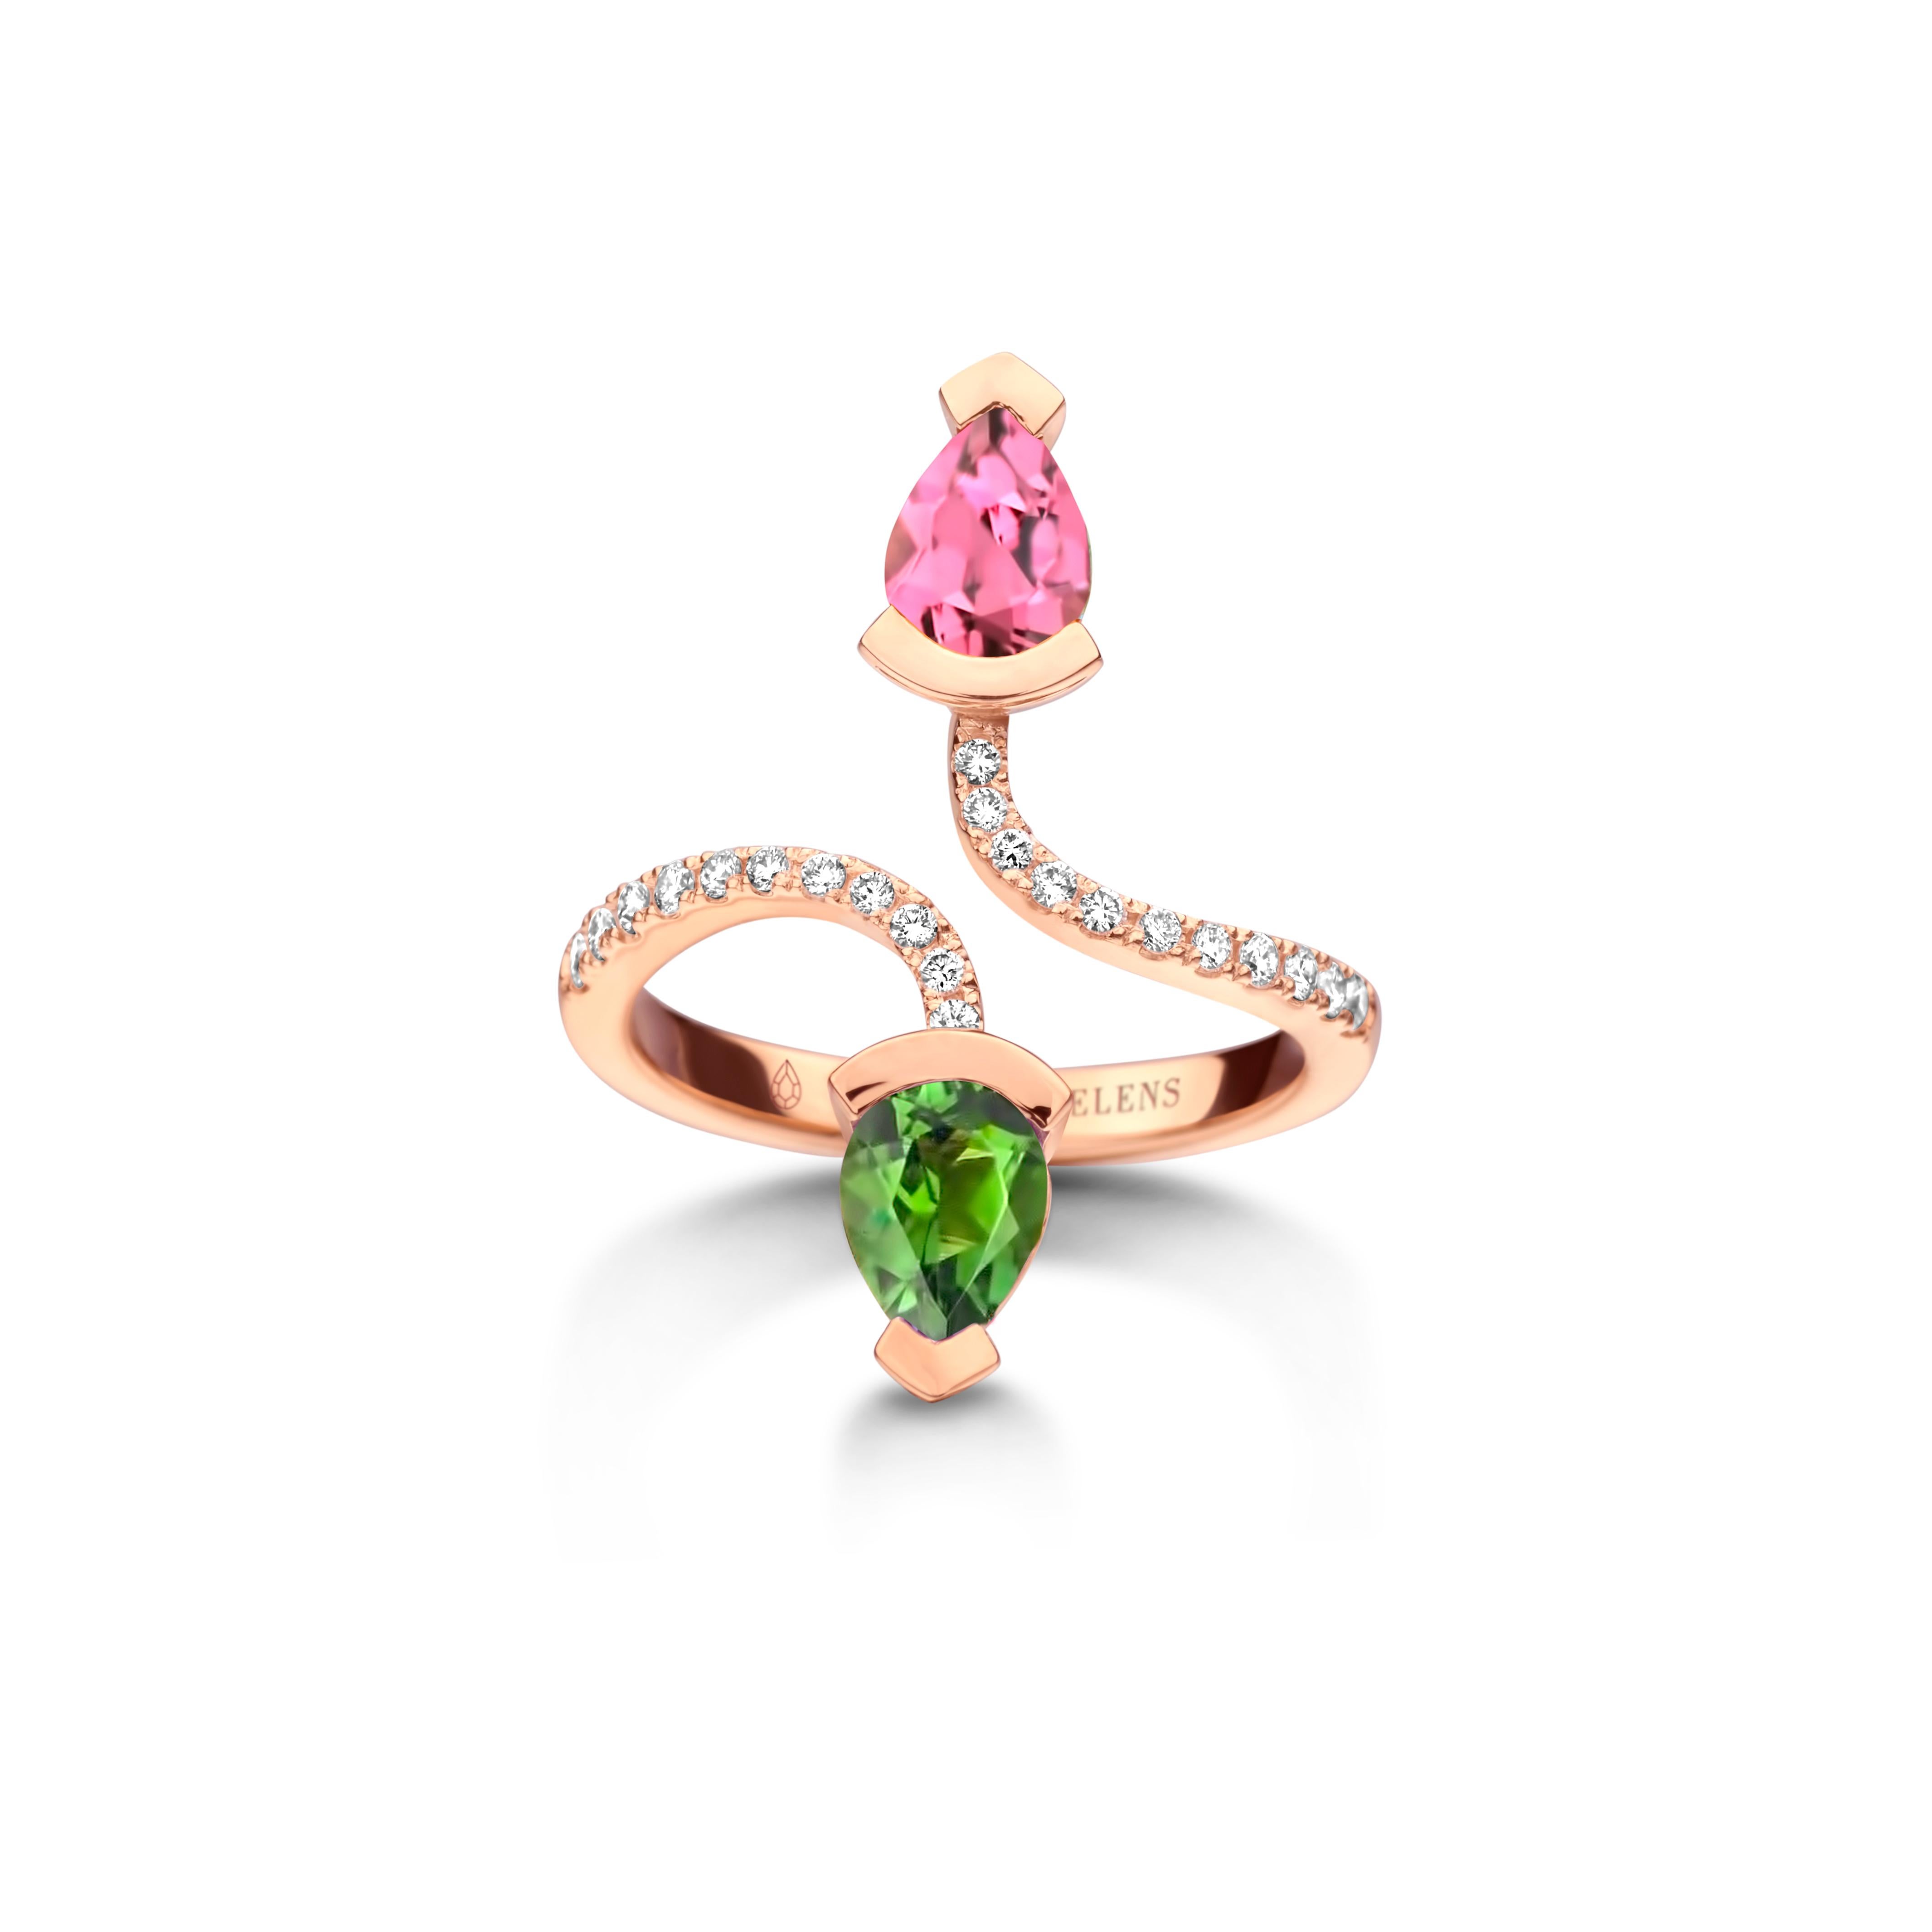 Adeline Duo ring in 18Kt yellow gold 5g set with a pear-shaped pink tourmaline 0,70 Ct, a pear-shaped green tourmaline 0,70 Ct and 0,19 Ct of white brilliant cut diamonds - VS F quality. Celine Roelens, a goldsmith and gemologist, is specialized in